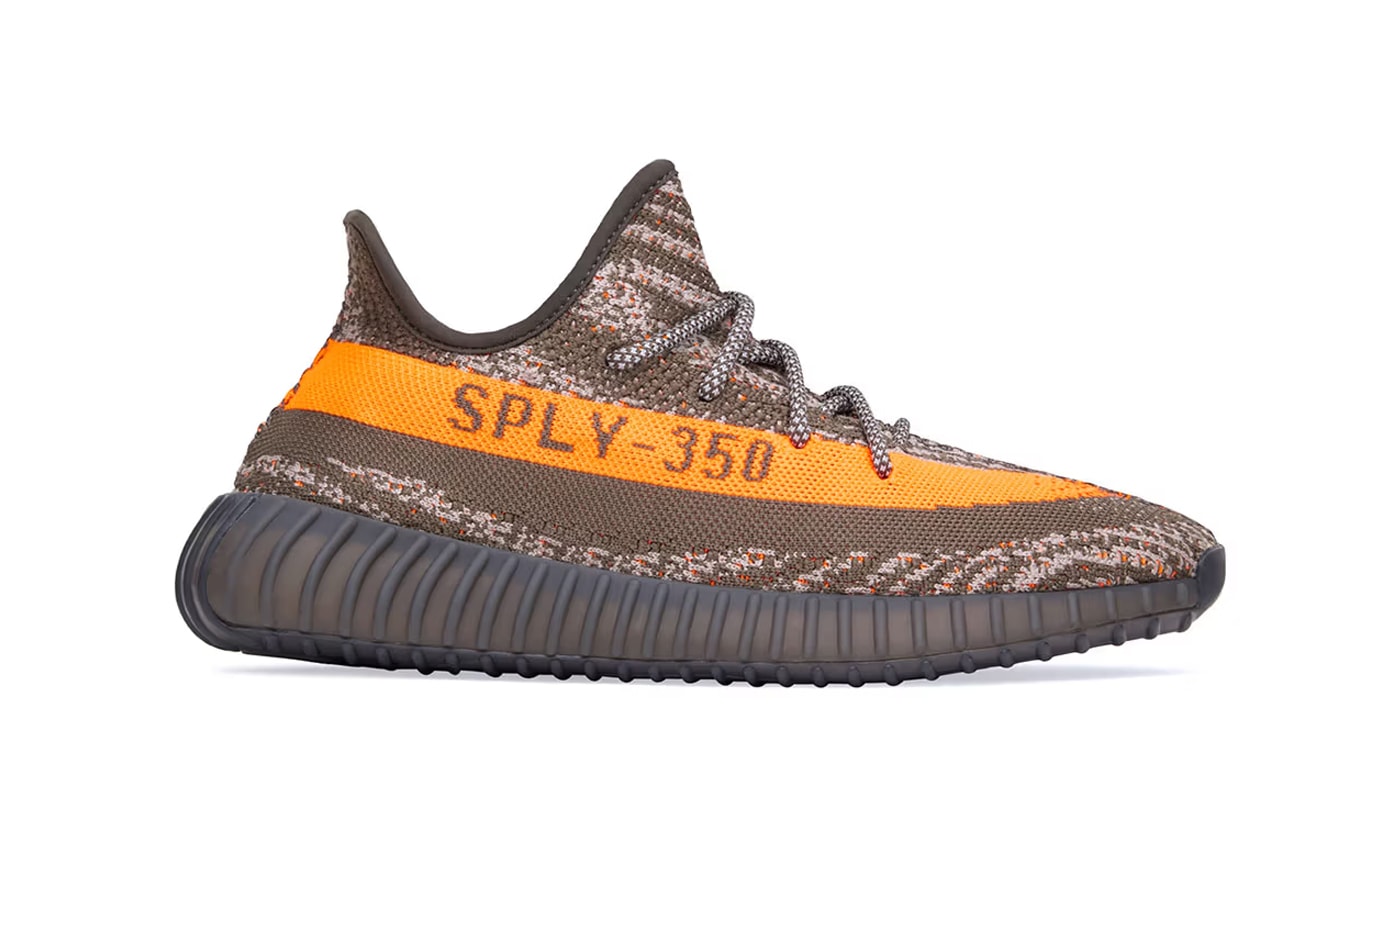 adidas yeezy boost 350 v2 carbon beluga HQ7045 release date info store list buying guide photos price 